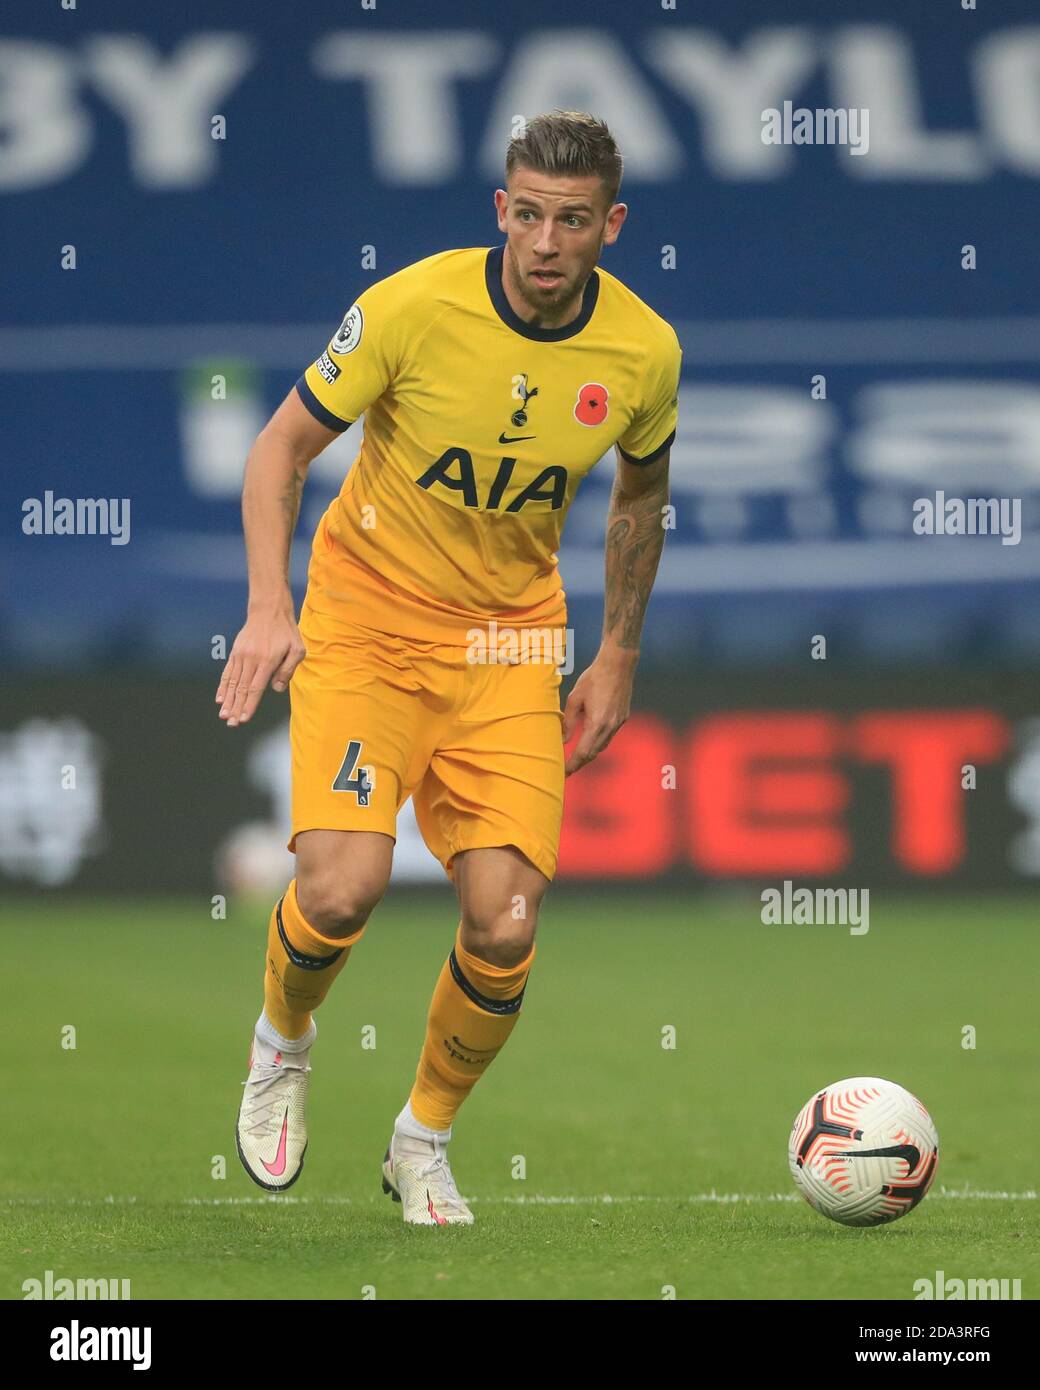 Toby Alderweireld #4 of Tottenham Hotspur during the game Stock Photo